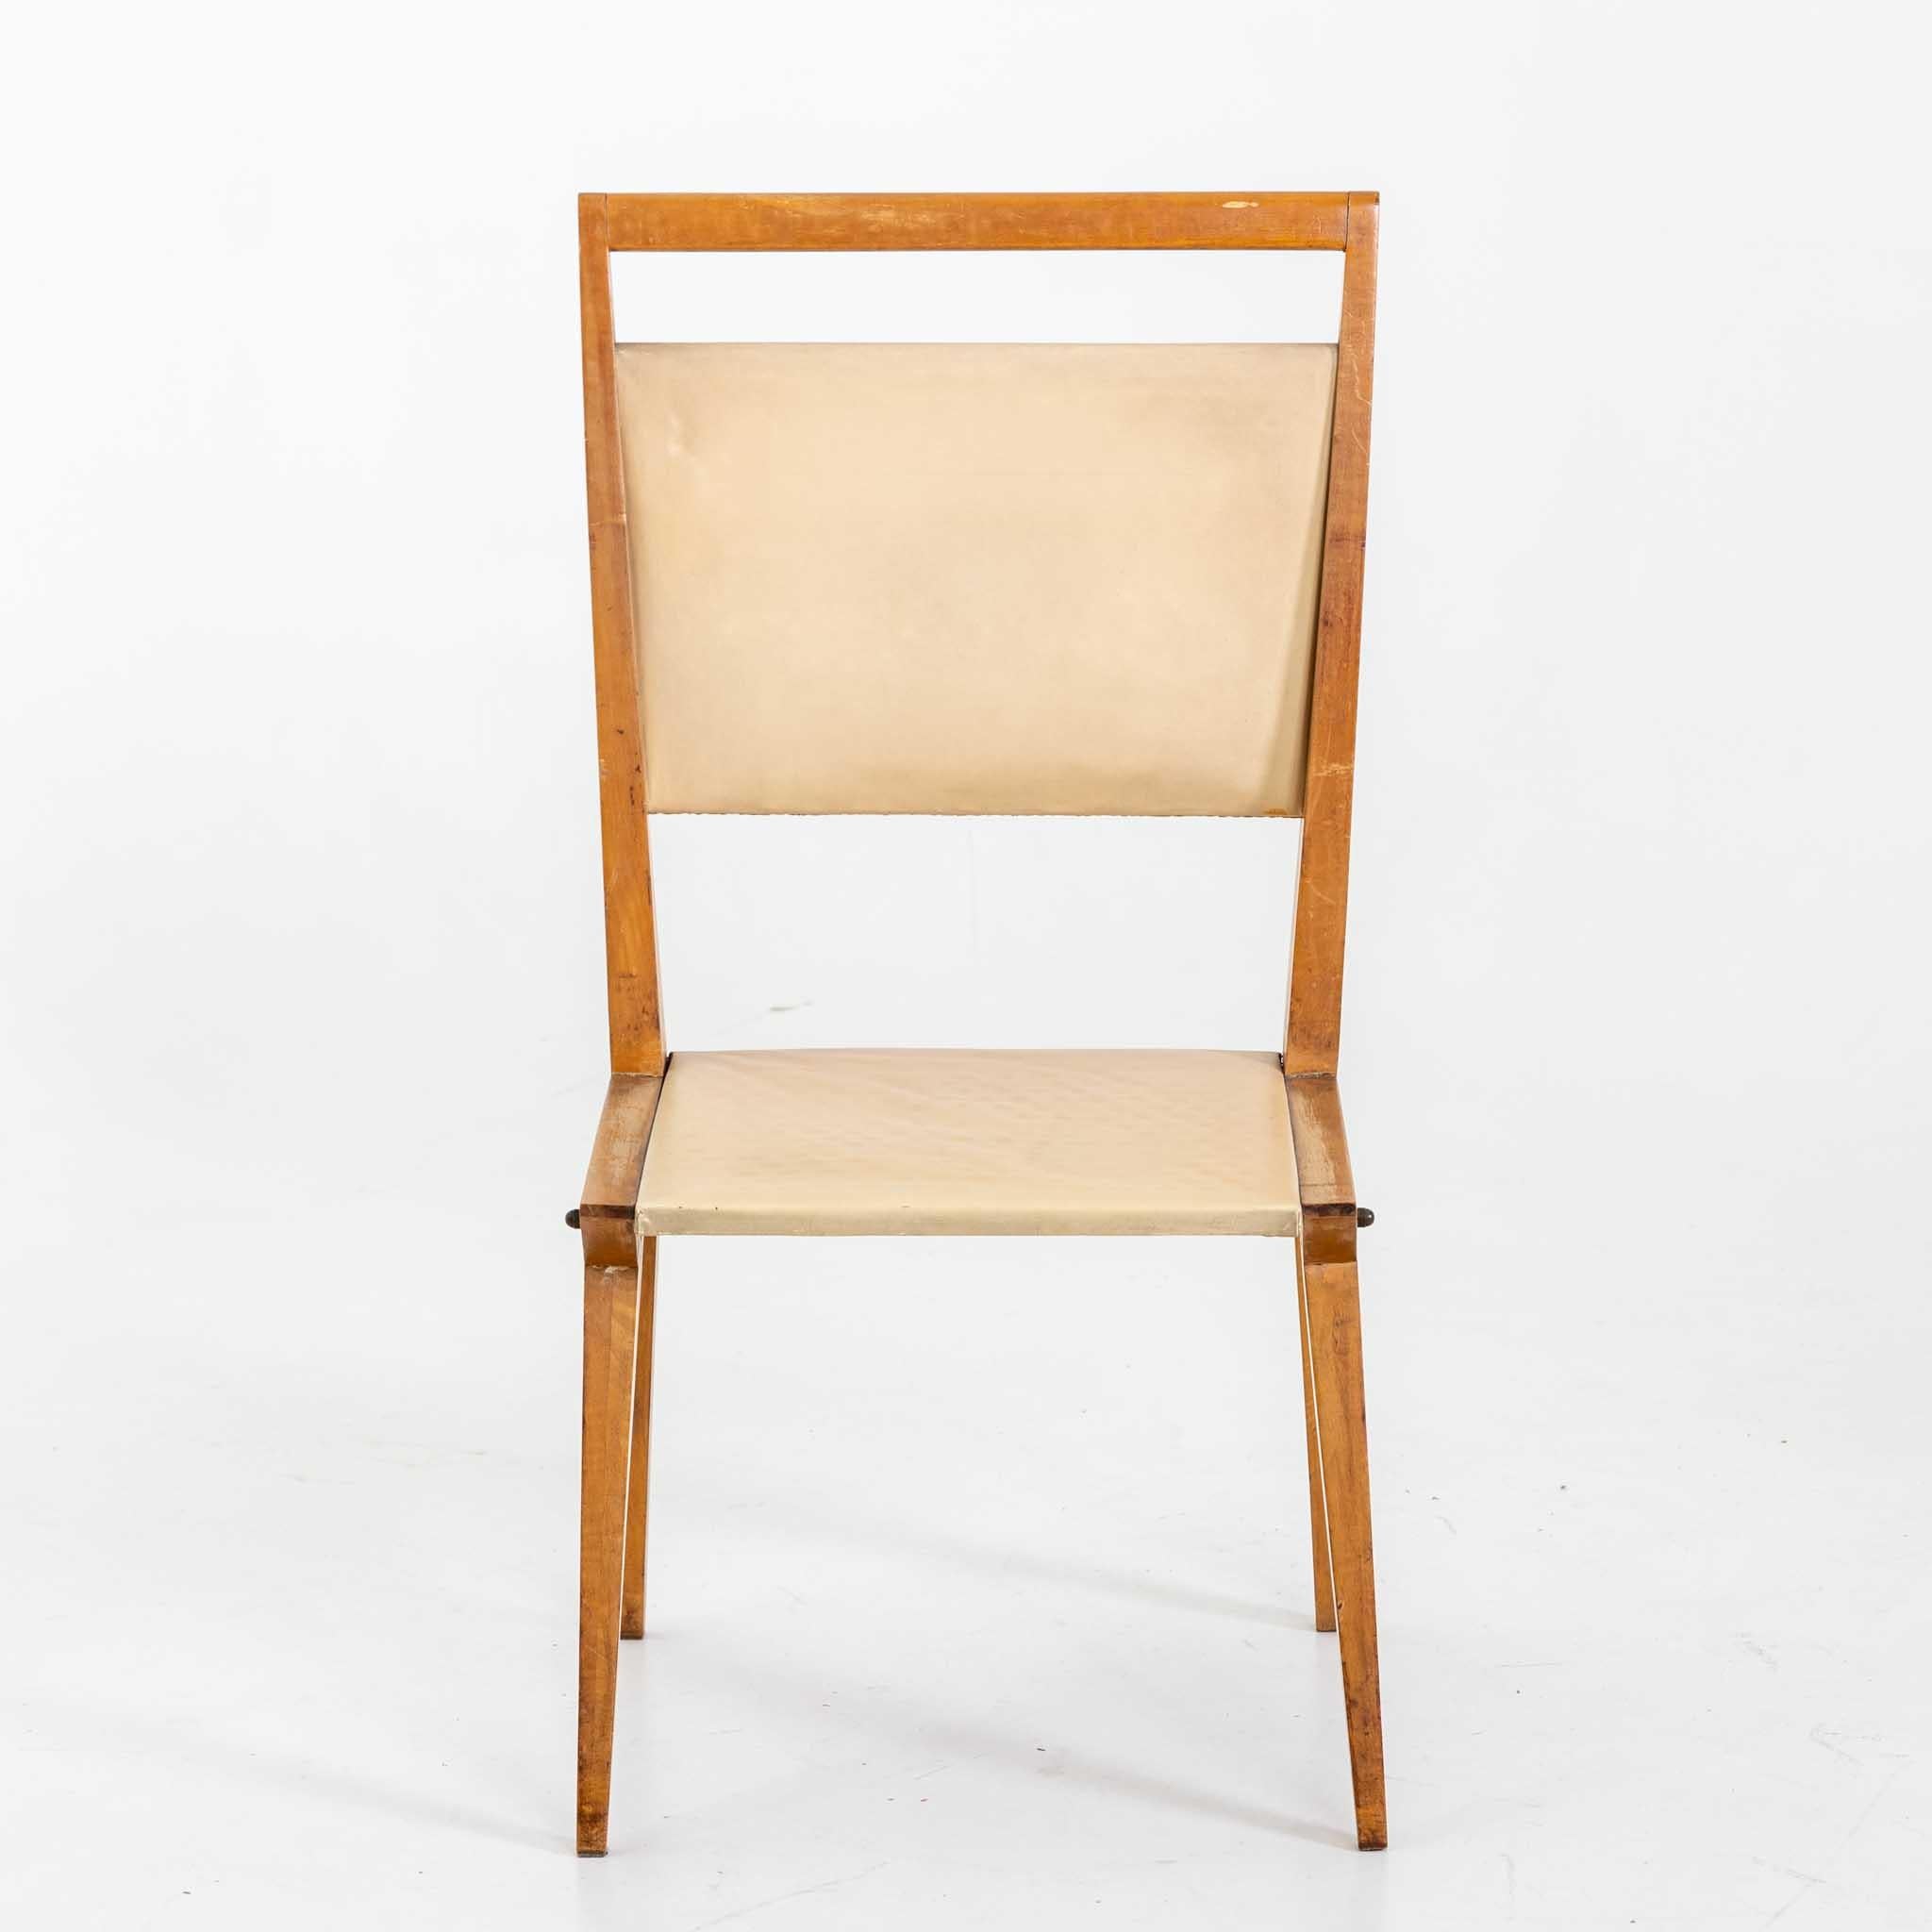 Modern Dining Chairs, Designed by Vittorio Armellini, Italy, Mid-20th Century For Sale